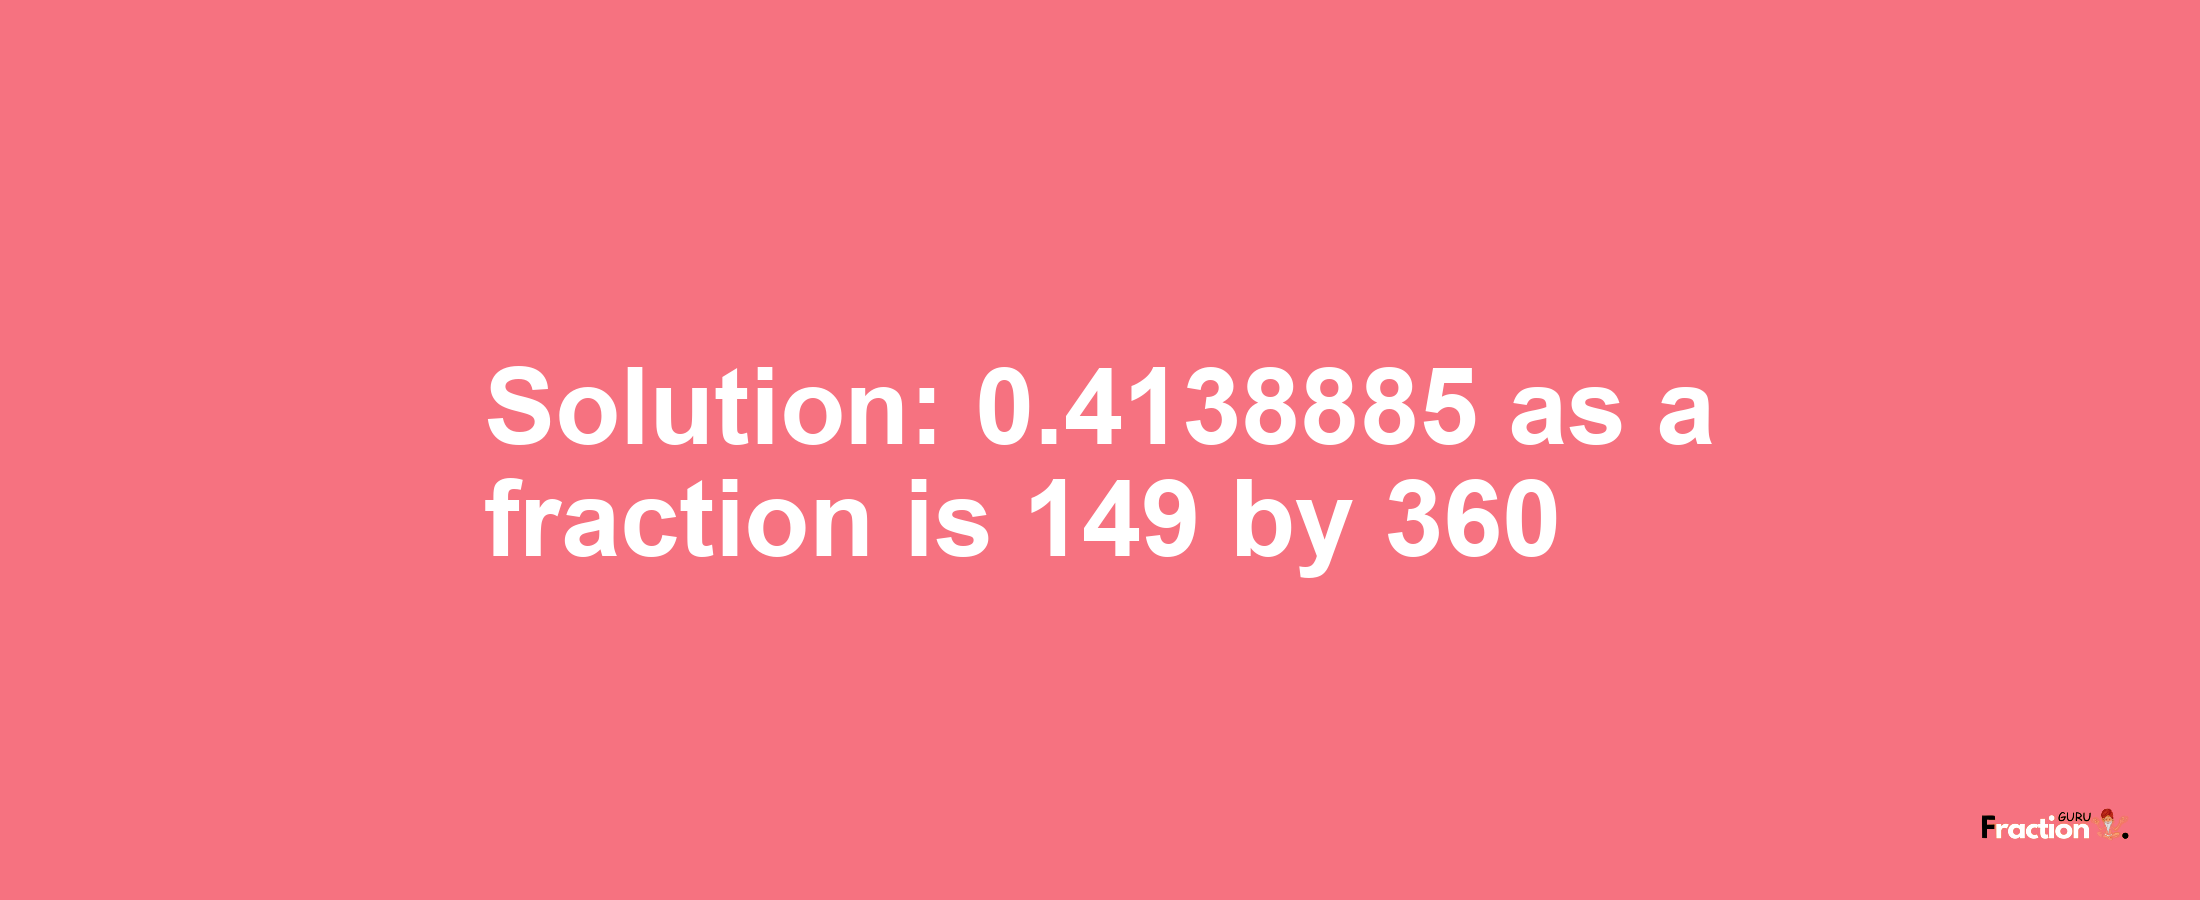 Solution:0.4138885 as a fraction is 149/360